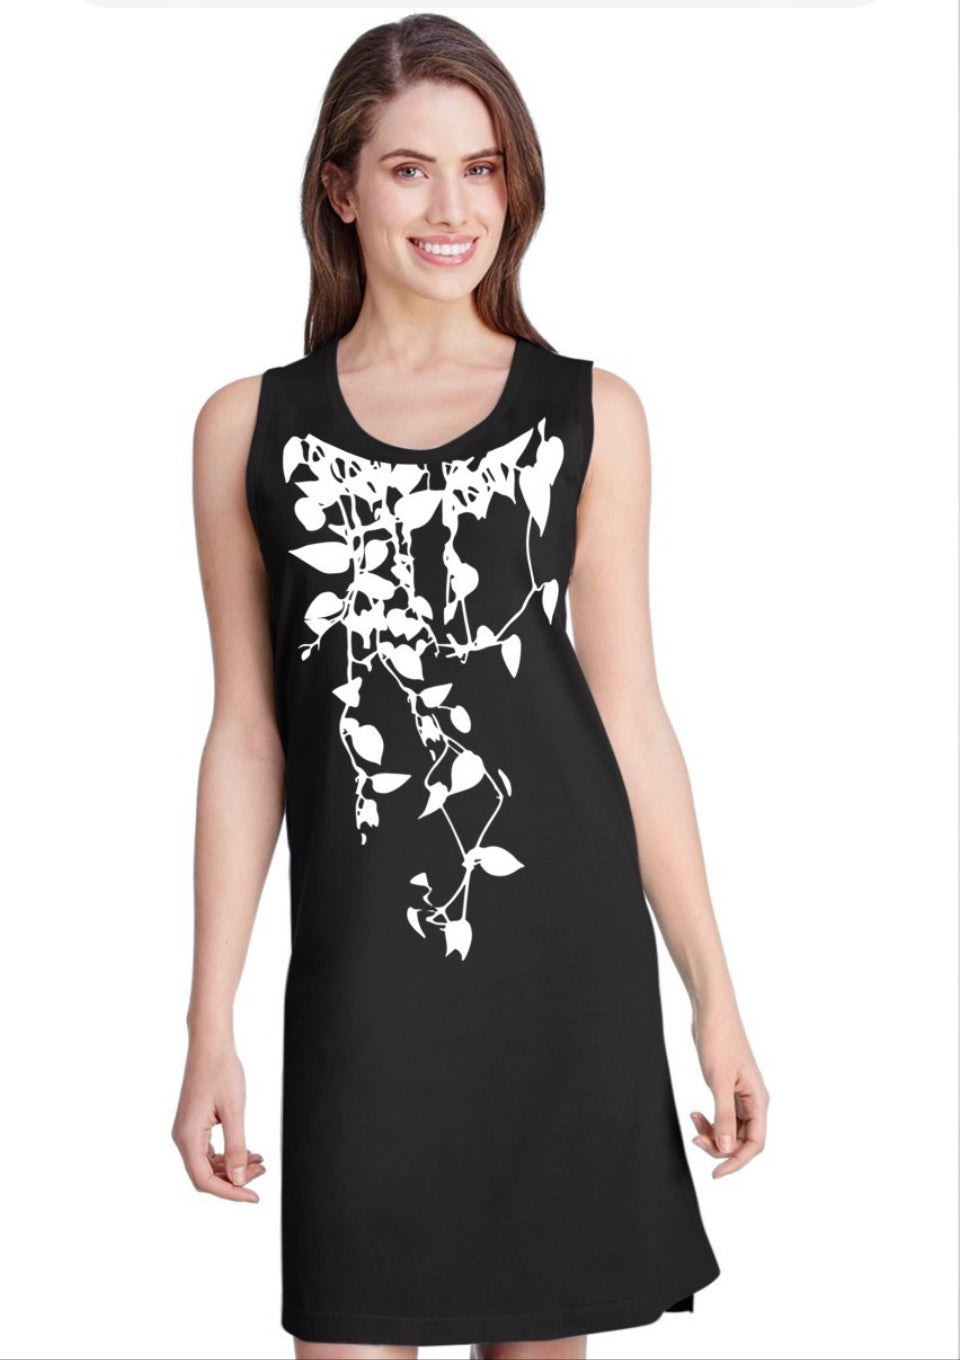 House Plant Dress Black with white leaves